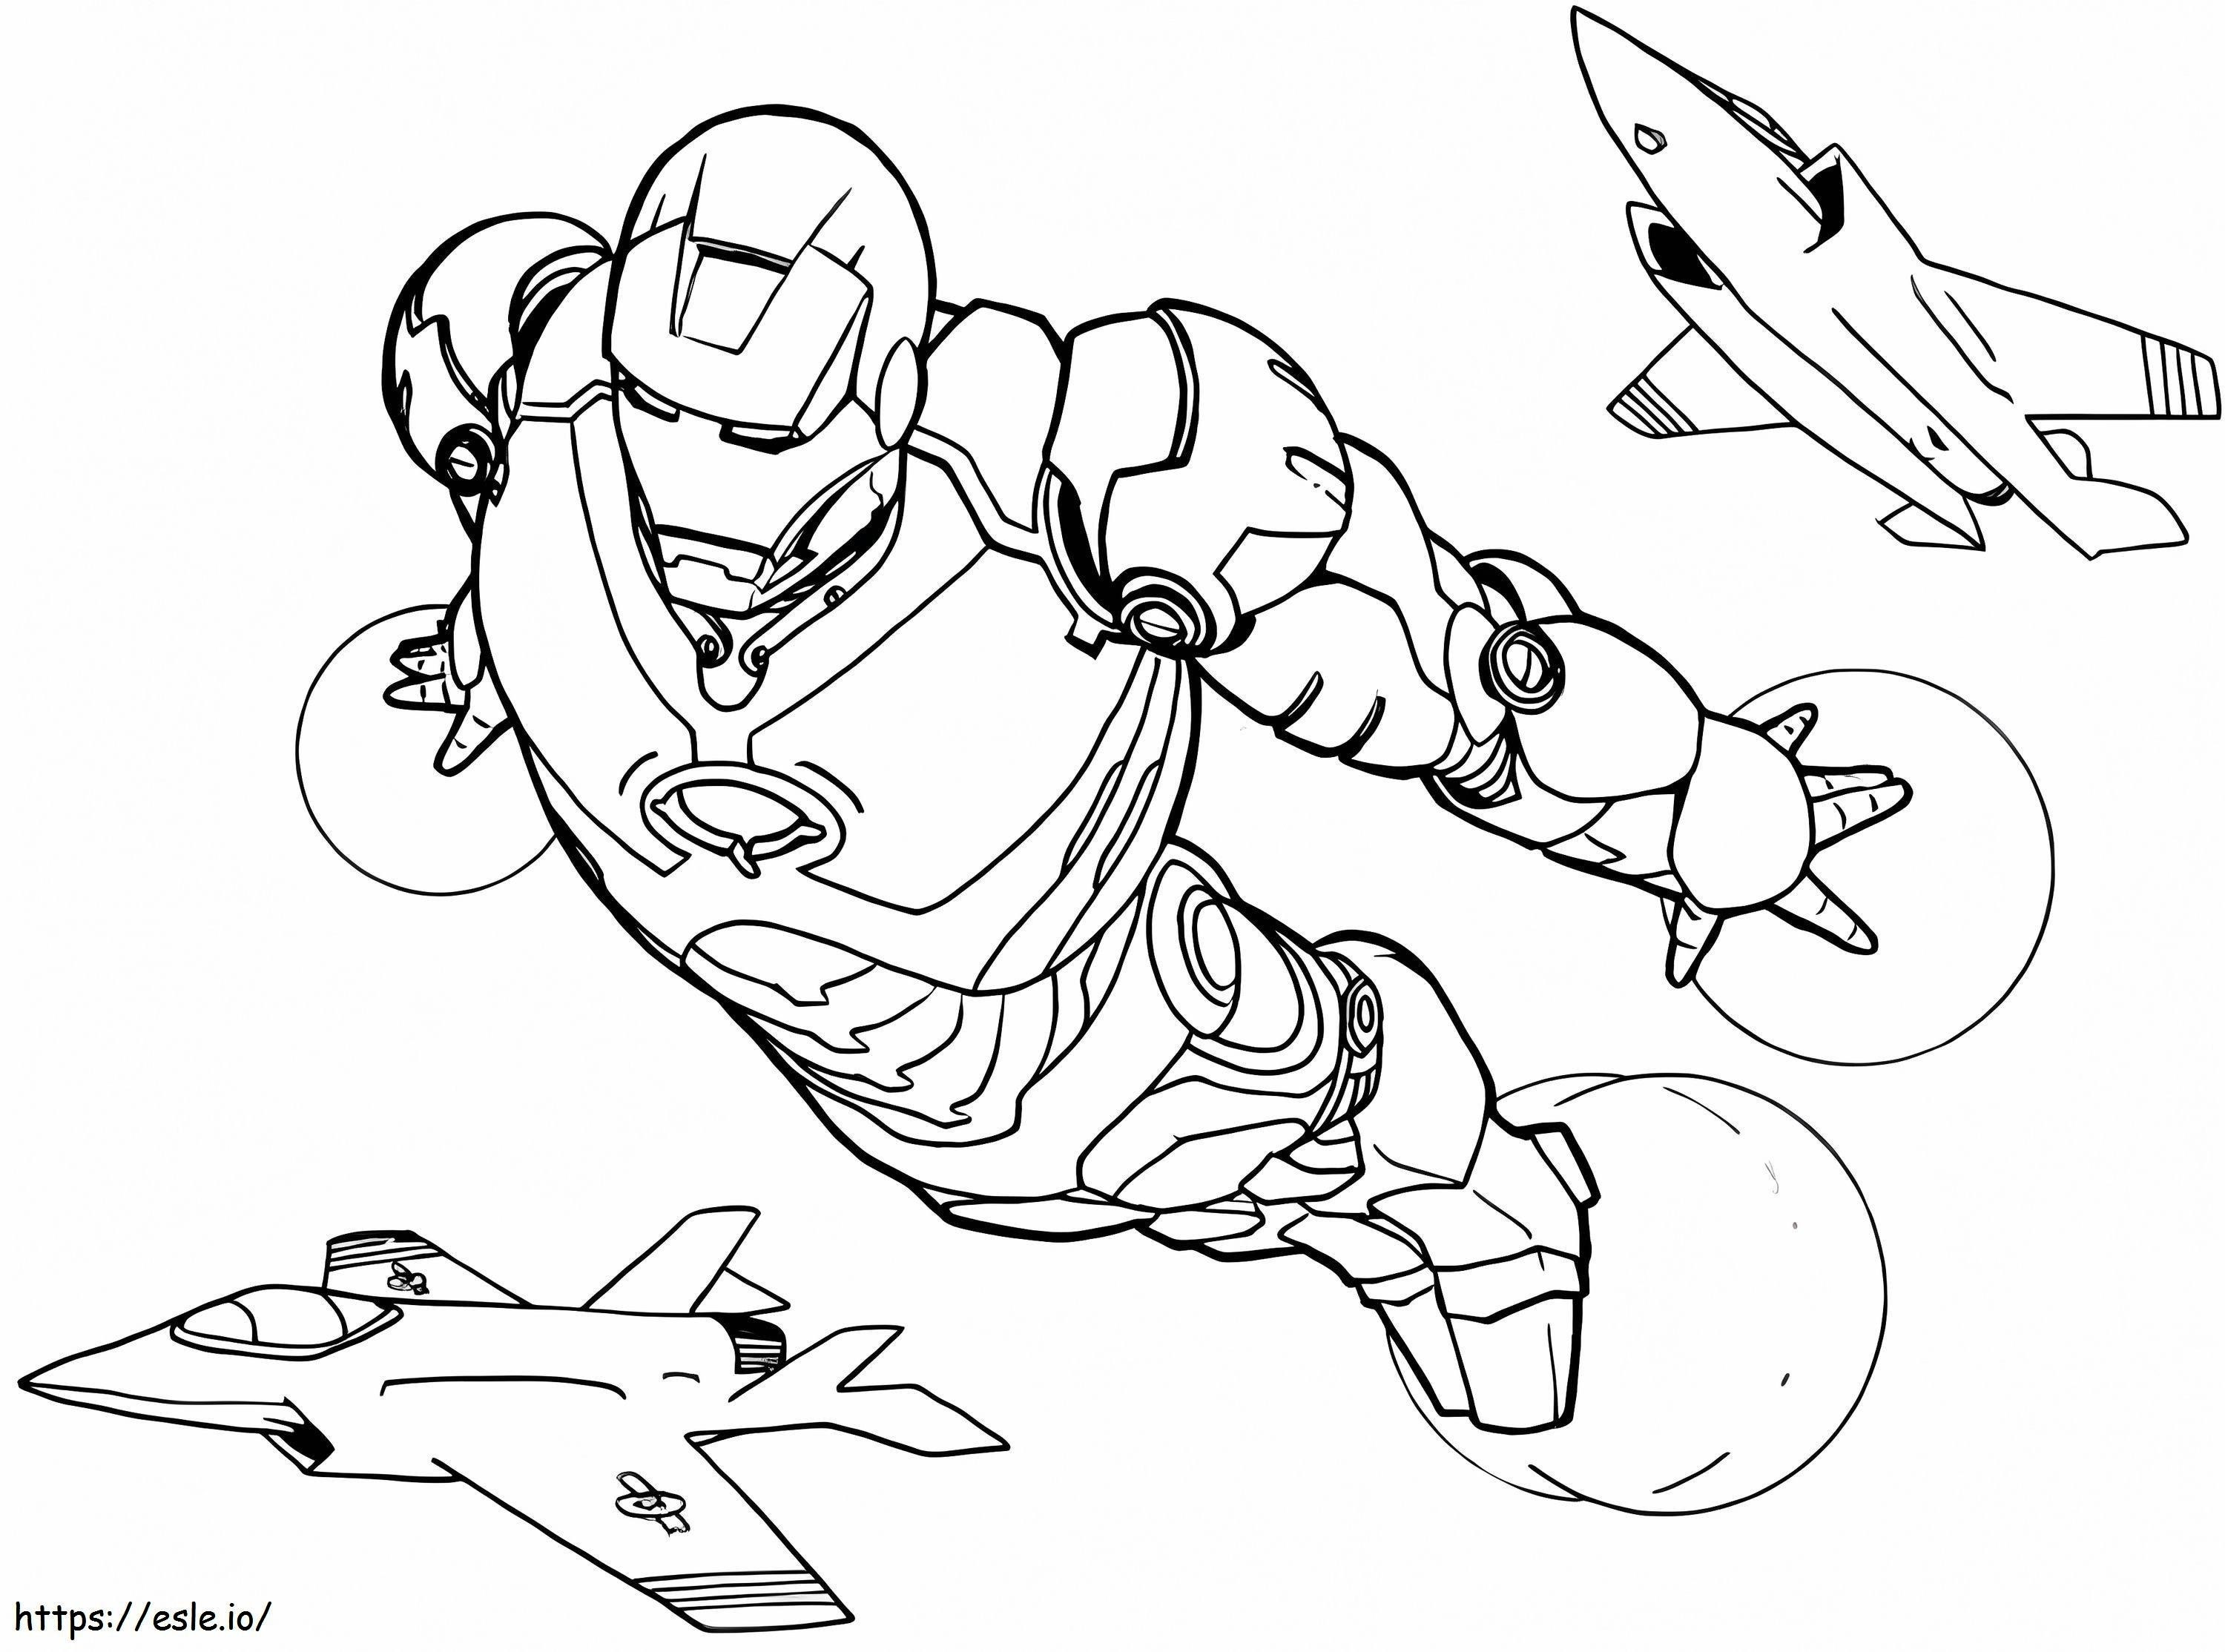 Ironman Flying With Two Jet Planes coloring page